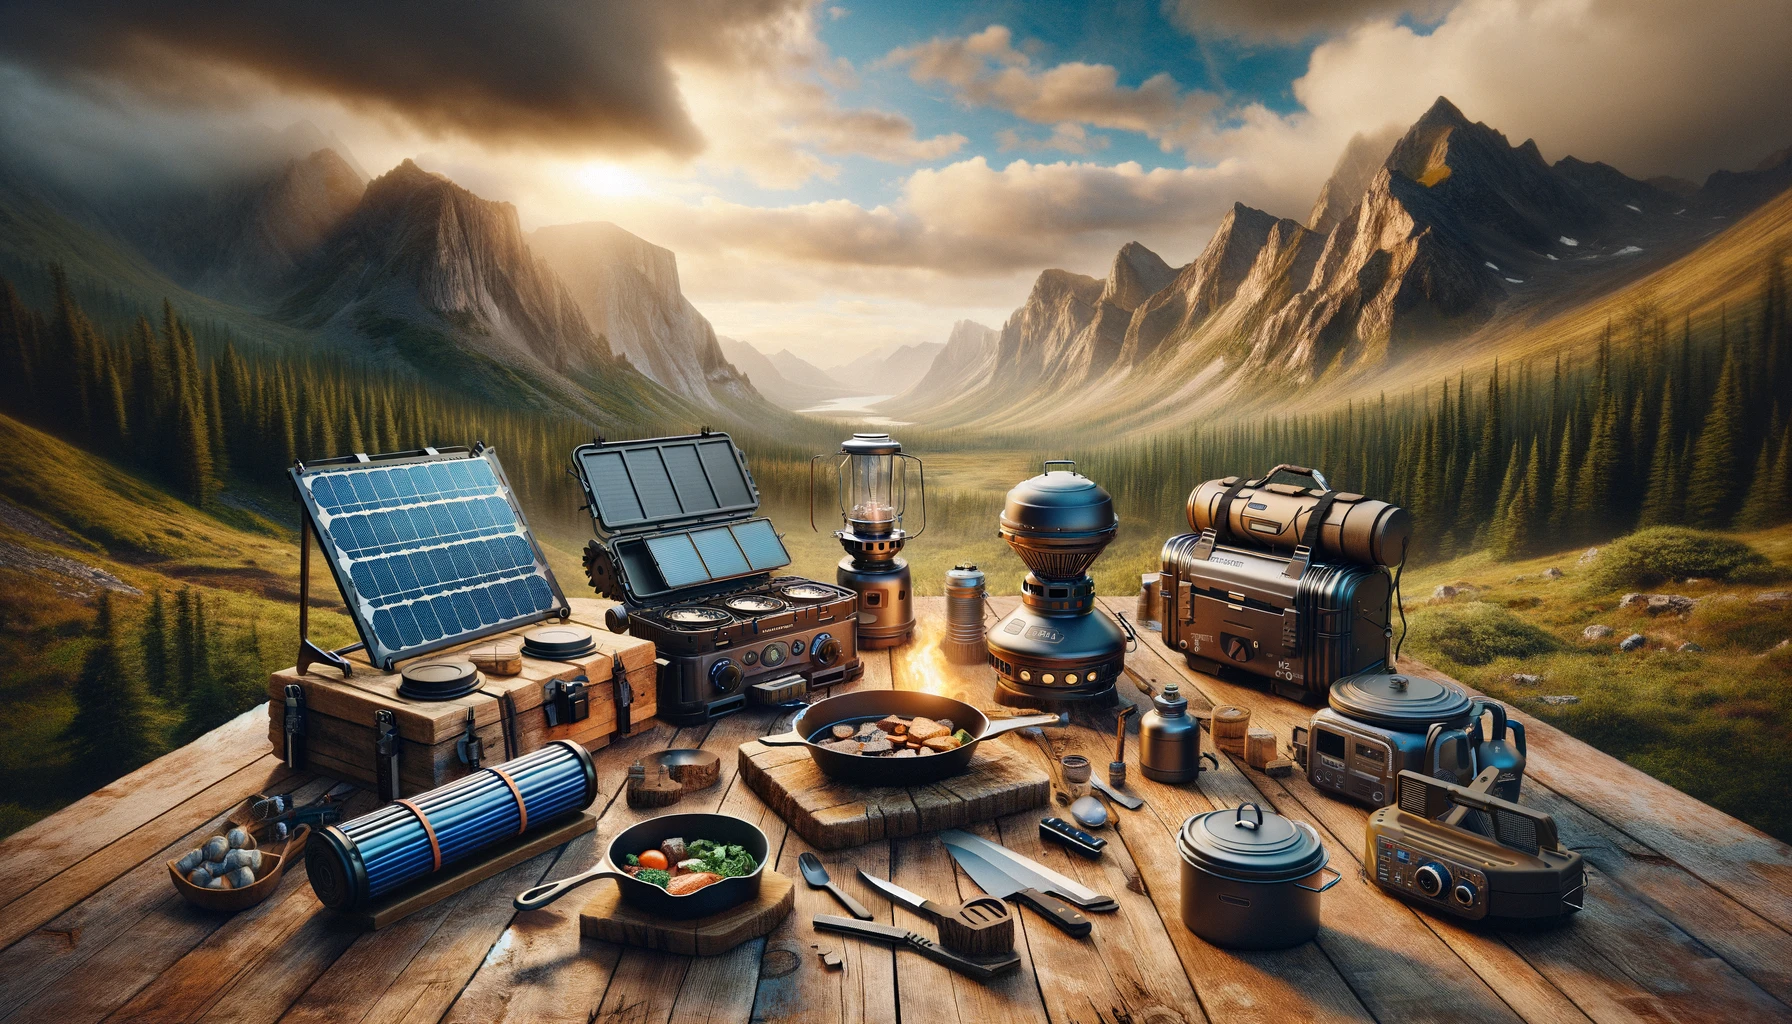 A selection of cooking equipment for off-grid adventures, including portable stoves, solar cookers, and cast-iron skillets, set against a rugged outdoor landscape, highlighting their utility and adaptability